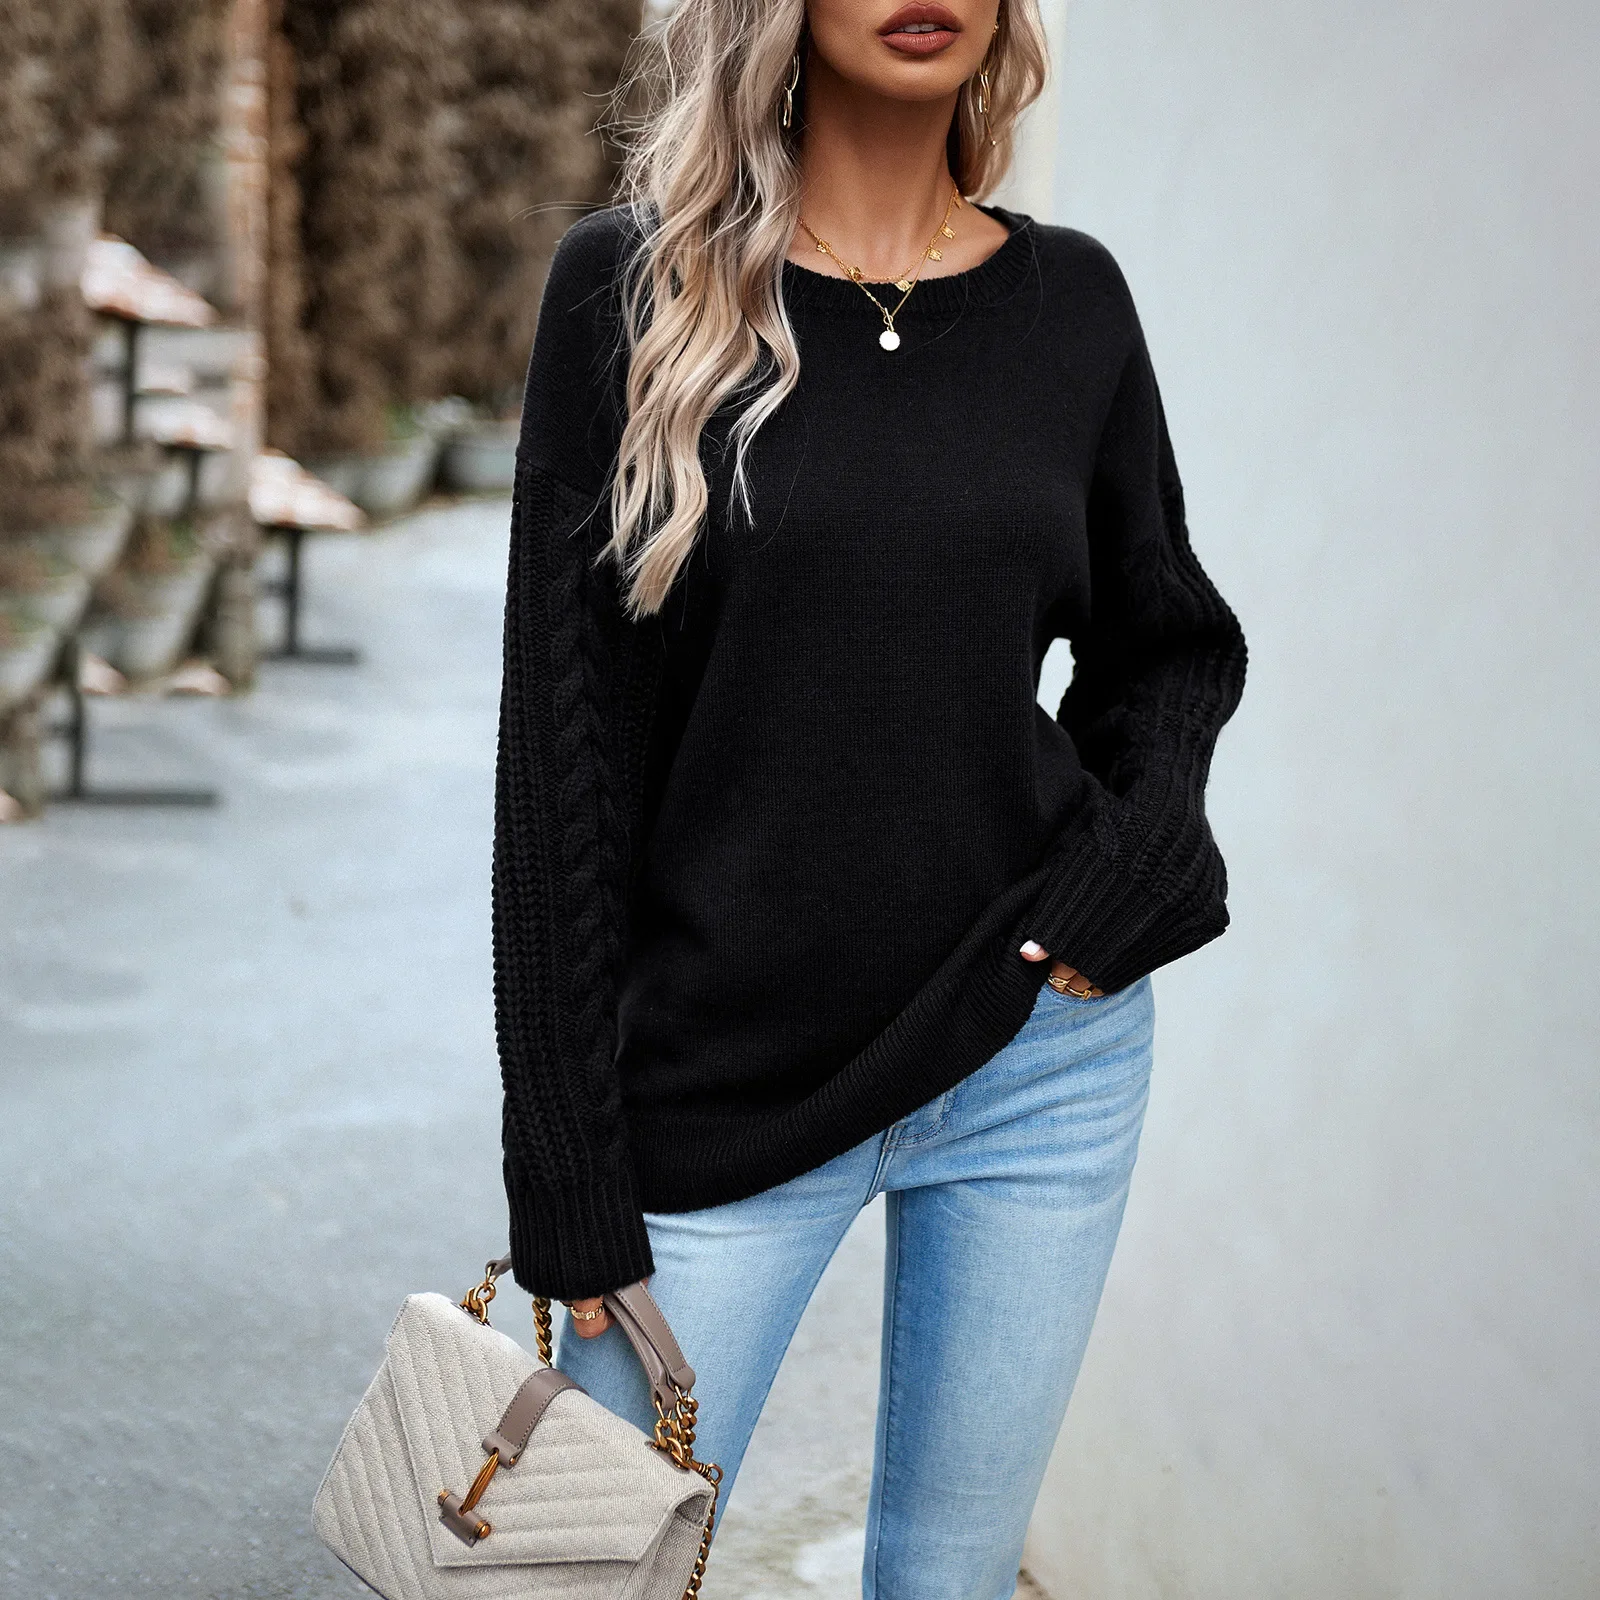 

2023 New Women Autumn Winter O Neck Long Sleeve Solid Color Knitted Tops for Ladies Fashion Causal Loose Sweater